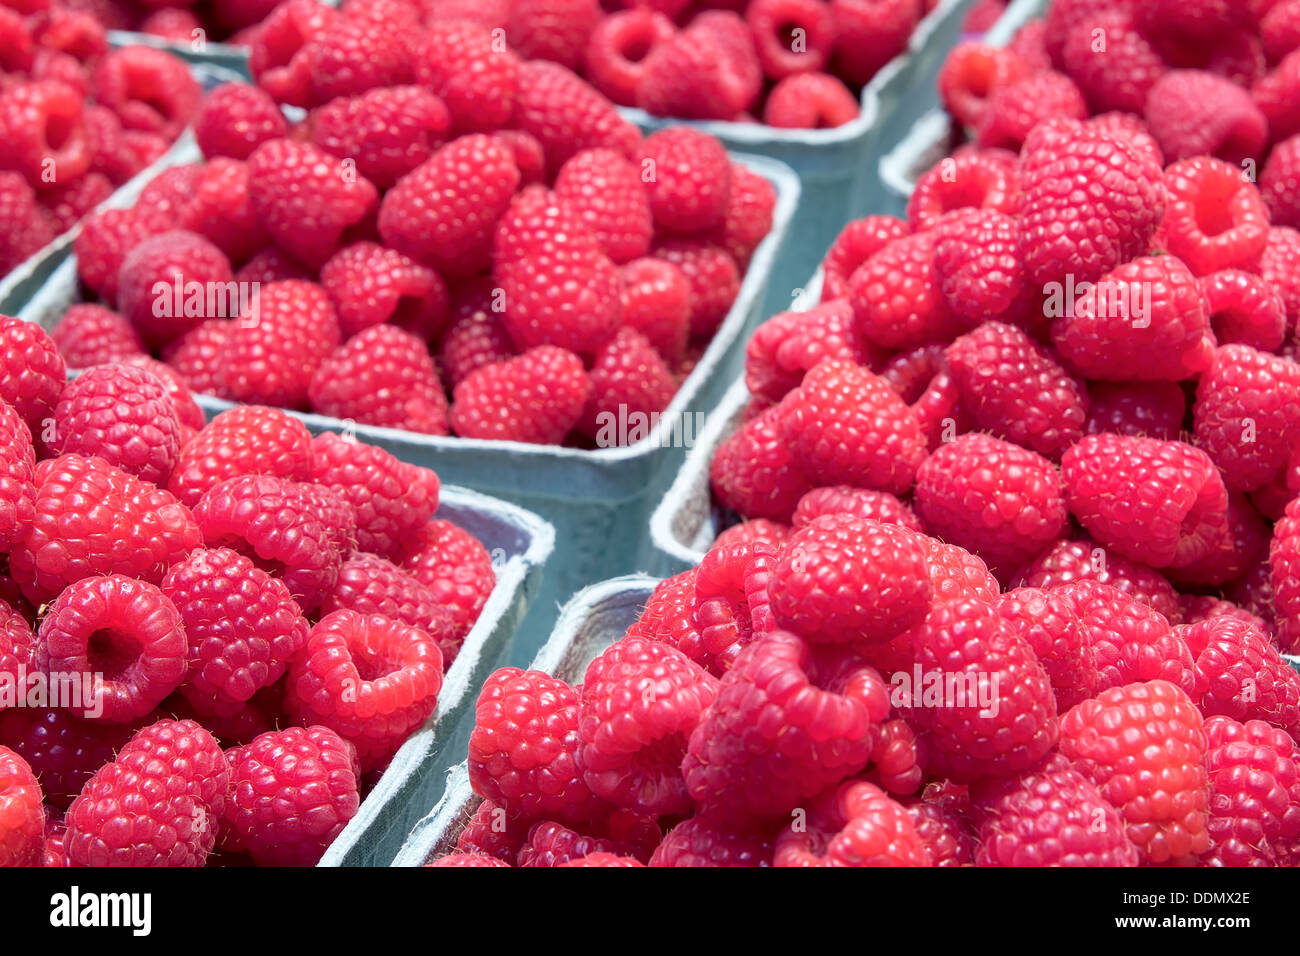 Piles of Red Raspberries in Boxes for Sale at Farmers Market Closeup Stock Photo